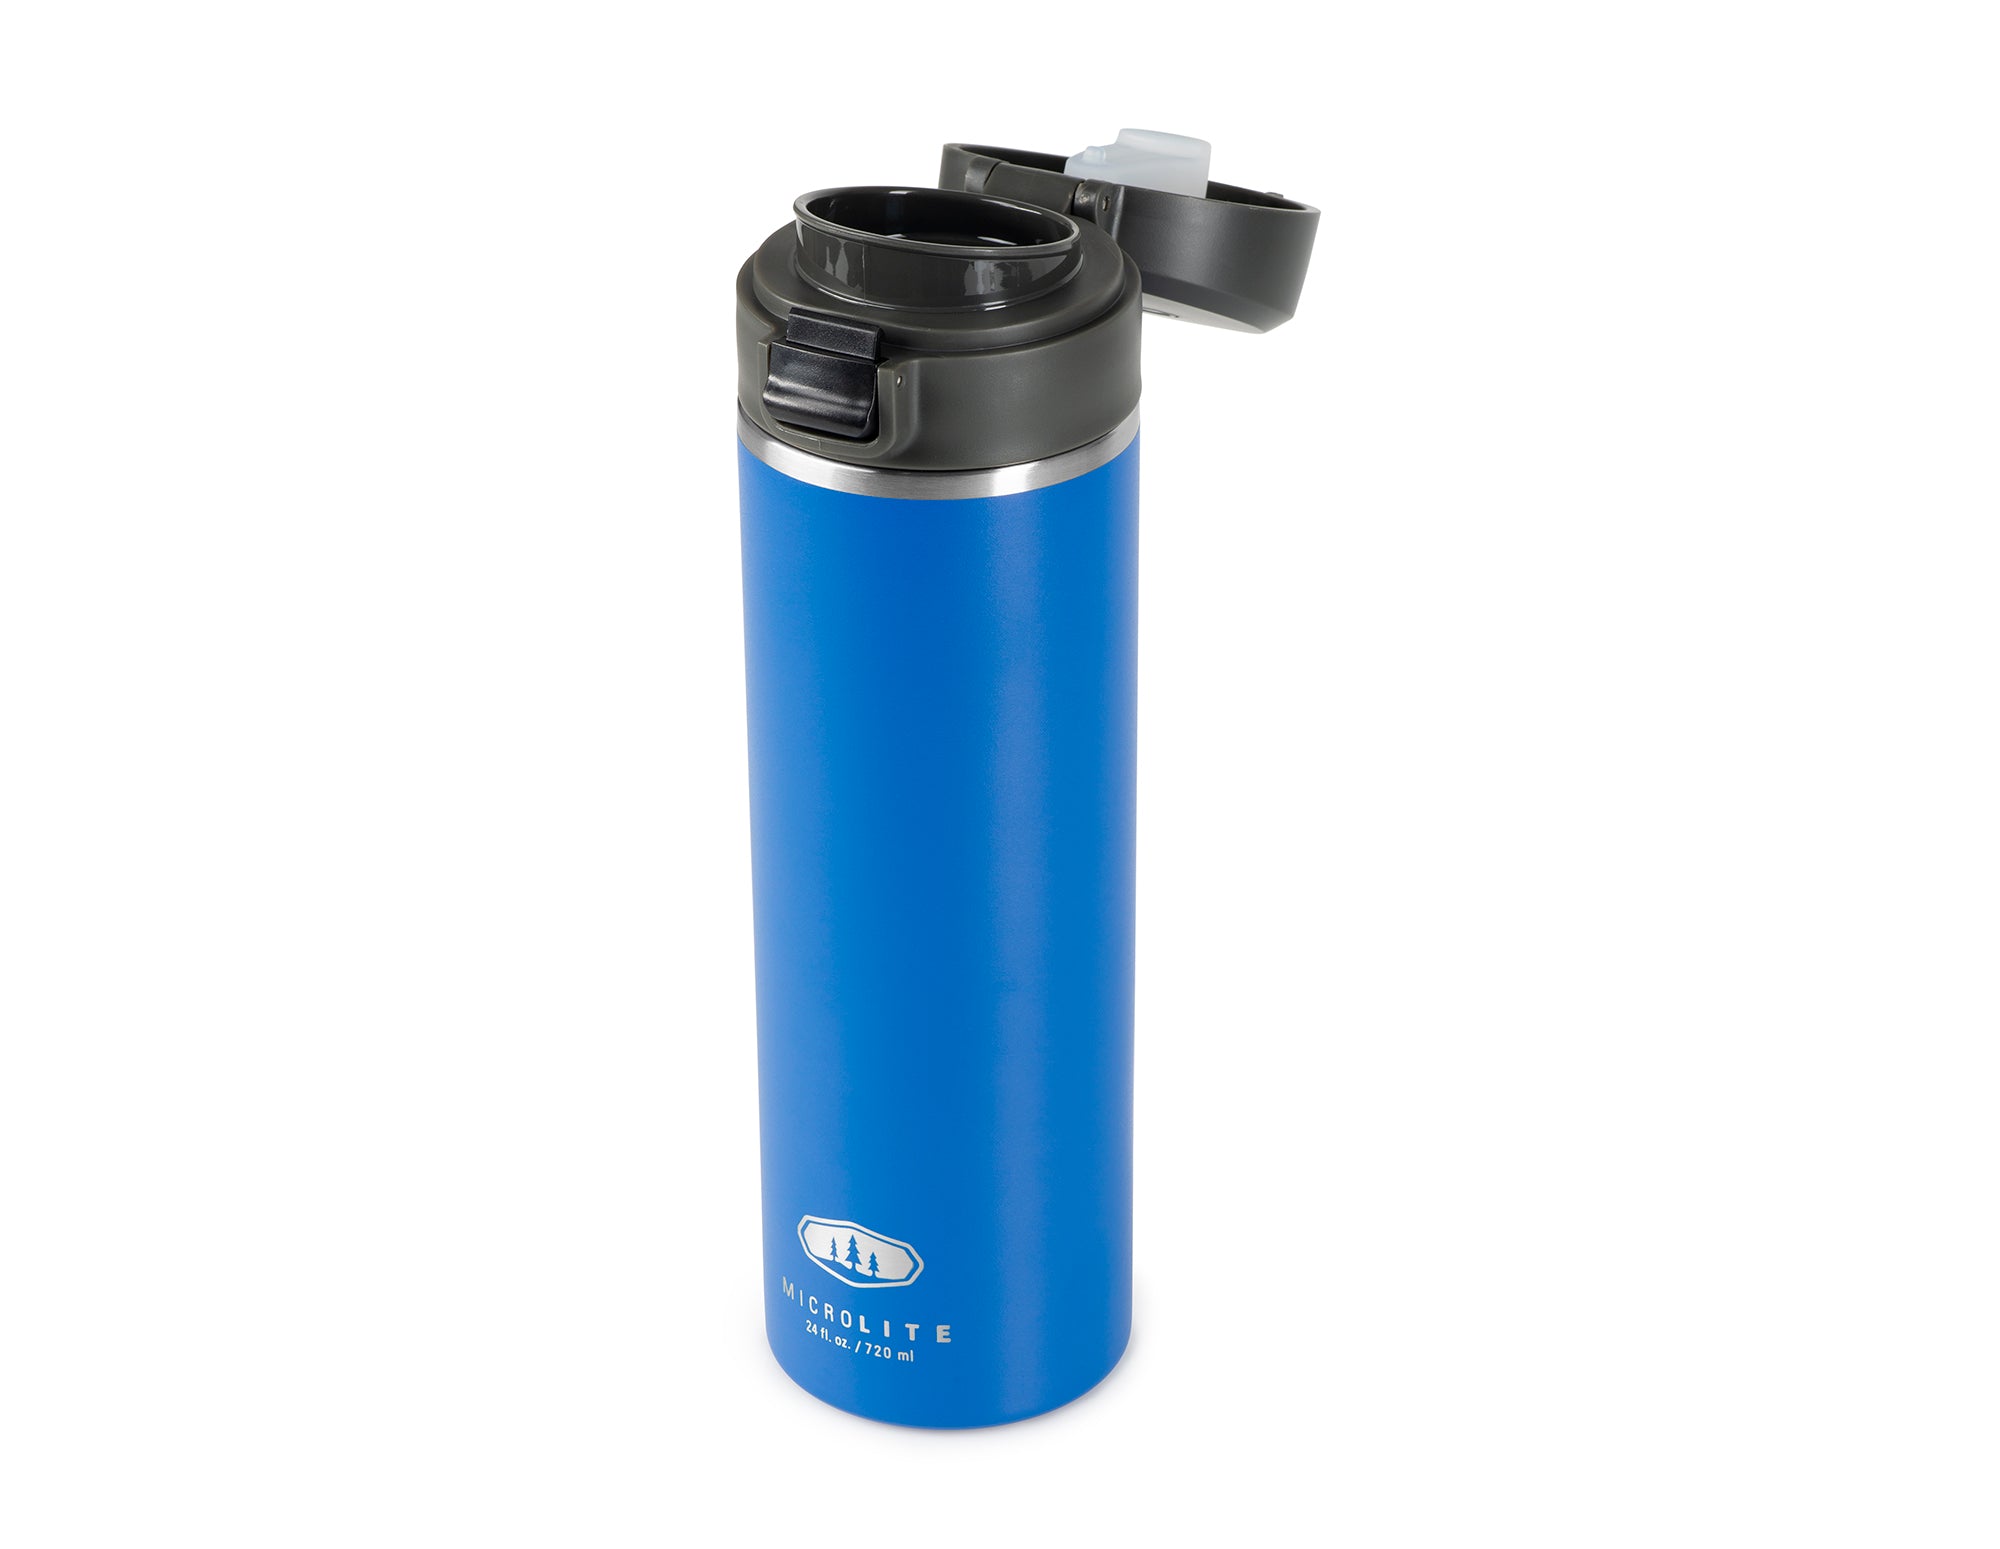 Pinnacle Vacuum Insulated Eco-Friendly Travel Tumbler with Straw - 40 oz.